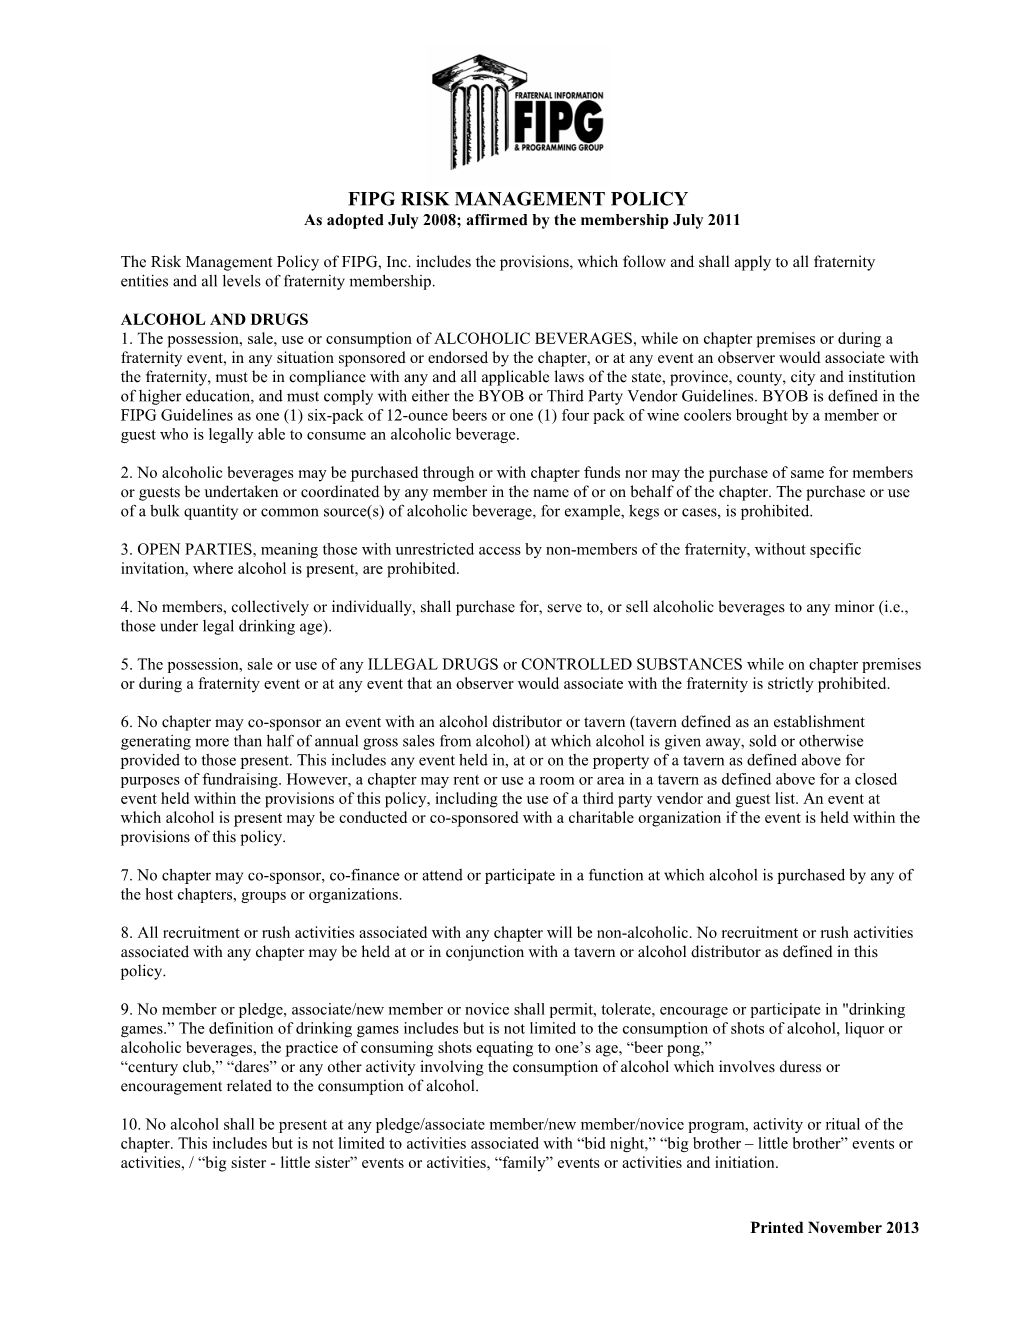 FIPG RISK MANAGEMENT POLICY As Adopted July 2008; Affirmed by the Membership July 2011